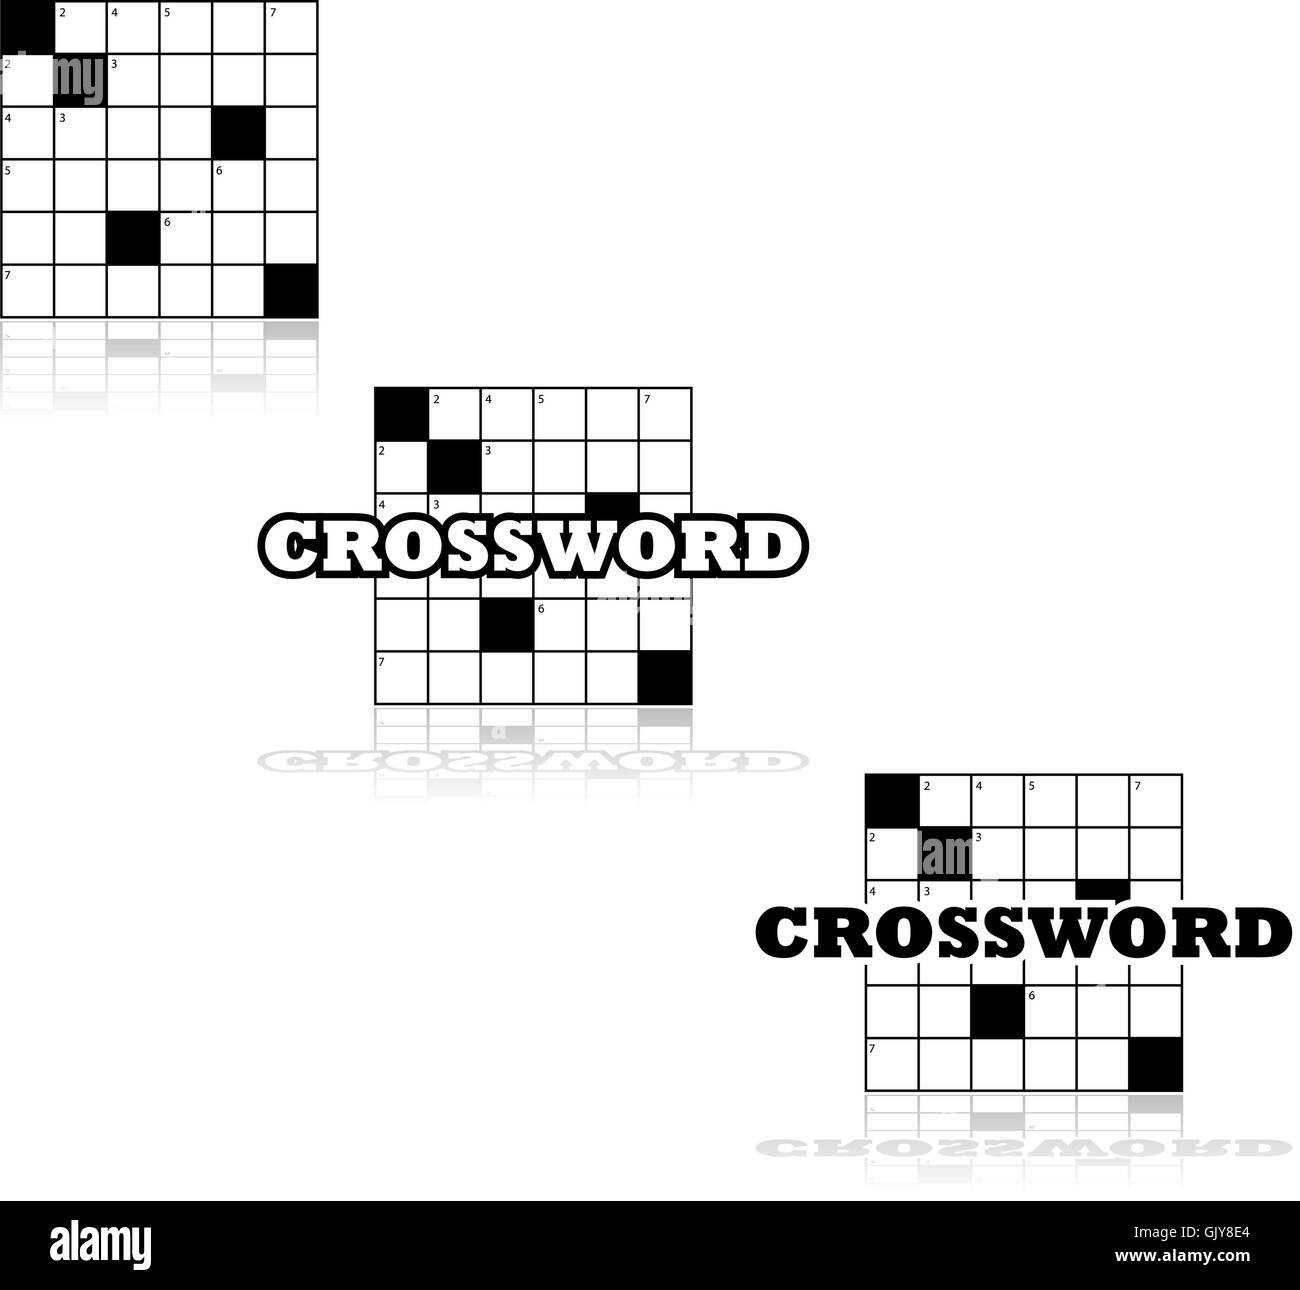 Write Crossword Puzzle High Resolution Stock Photography and Images - Alamy